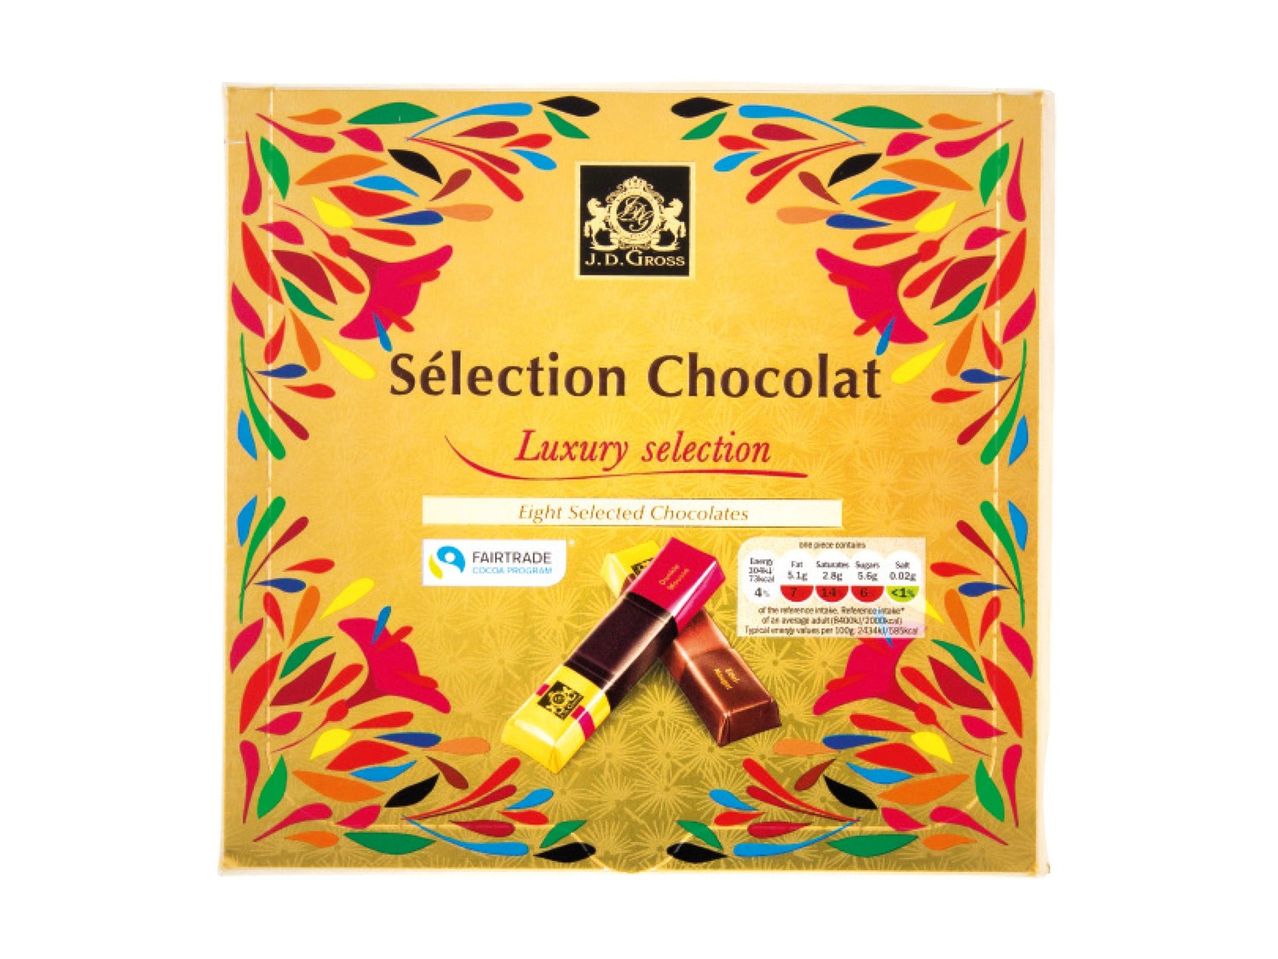 Go to full screen view: Fairtrade Chocolate - Image 13